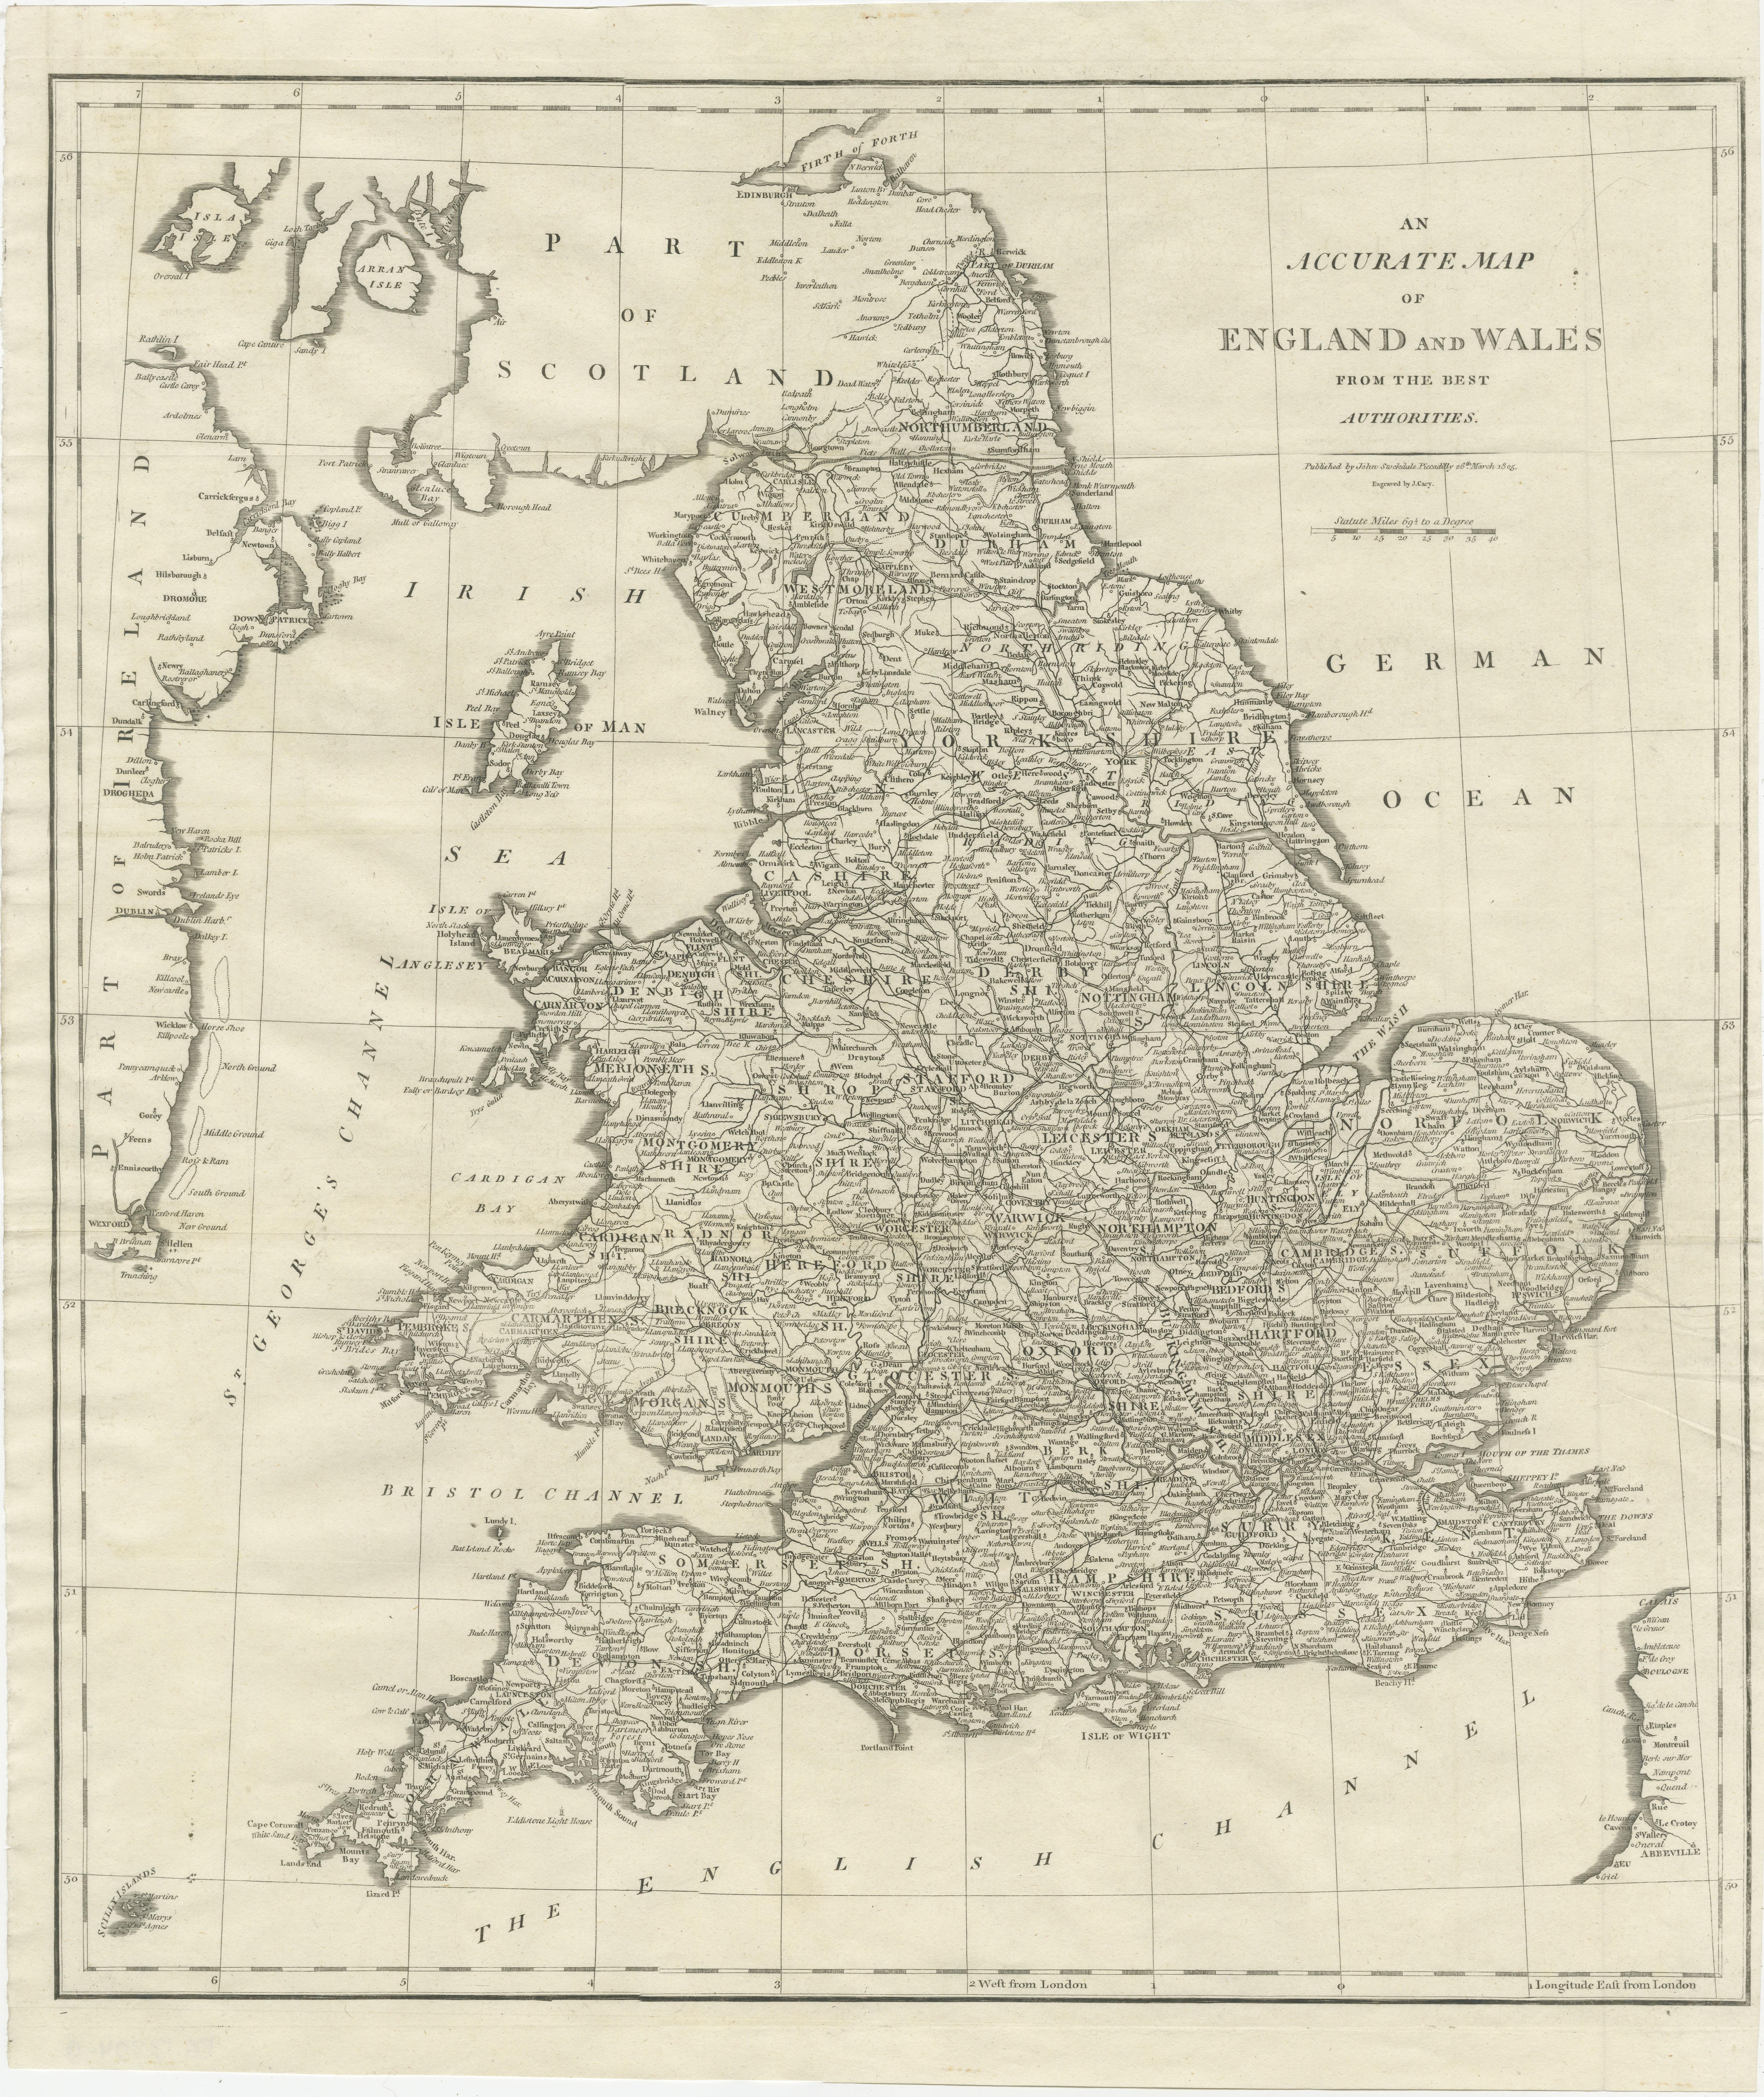 Antique map titled 'An Accurate Map of England and Wales'. Original old map of England and Wales. Engraved by John Cary. Originates from 'New British Atlas' by John Stockdale, published 1805. 

John Cary (1755-1835) was a British cartographer and